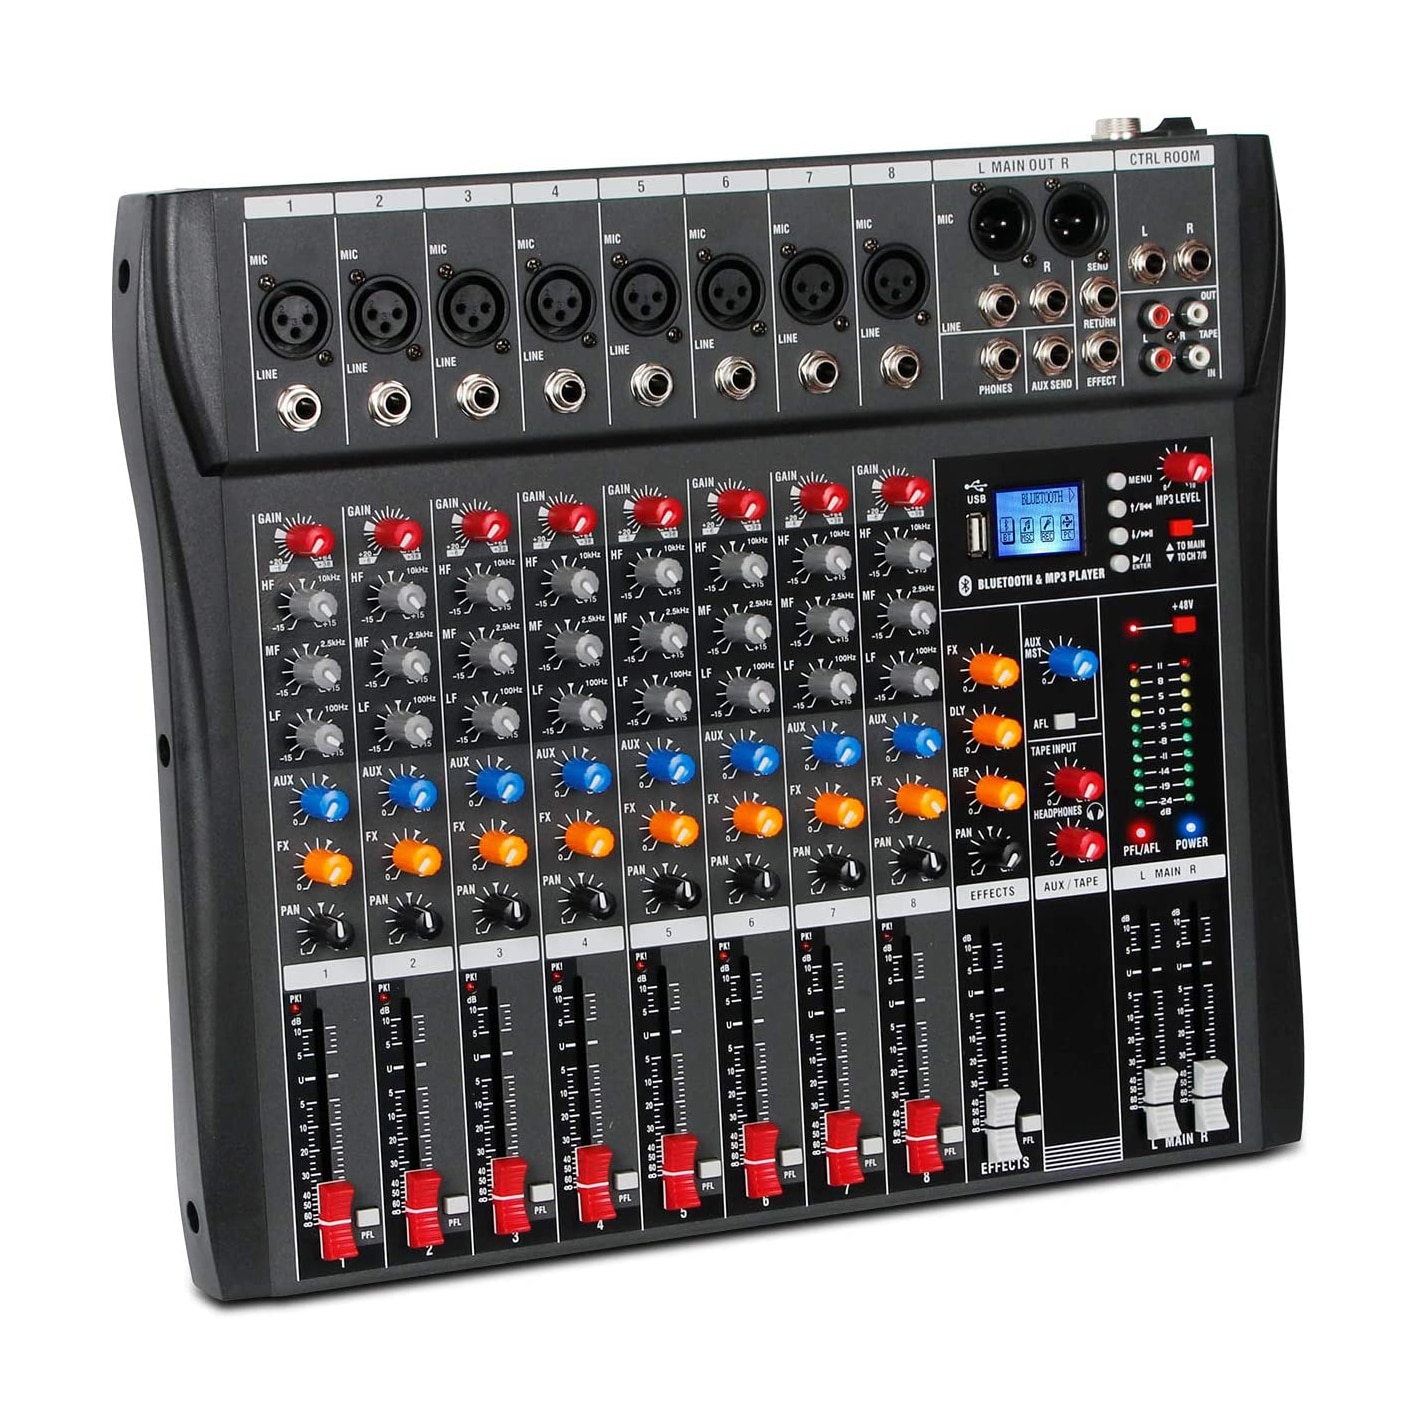 Top 10 Best Audio Mixers in 2021 Reviews | Buying Guide